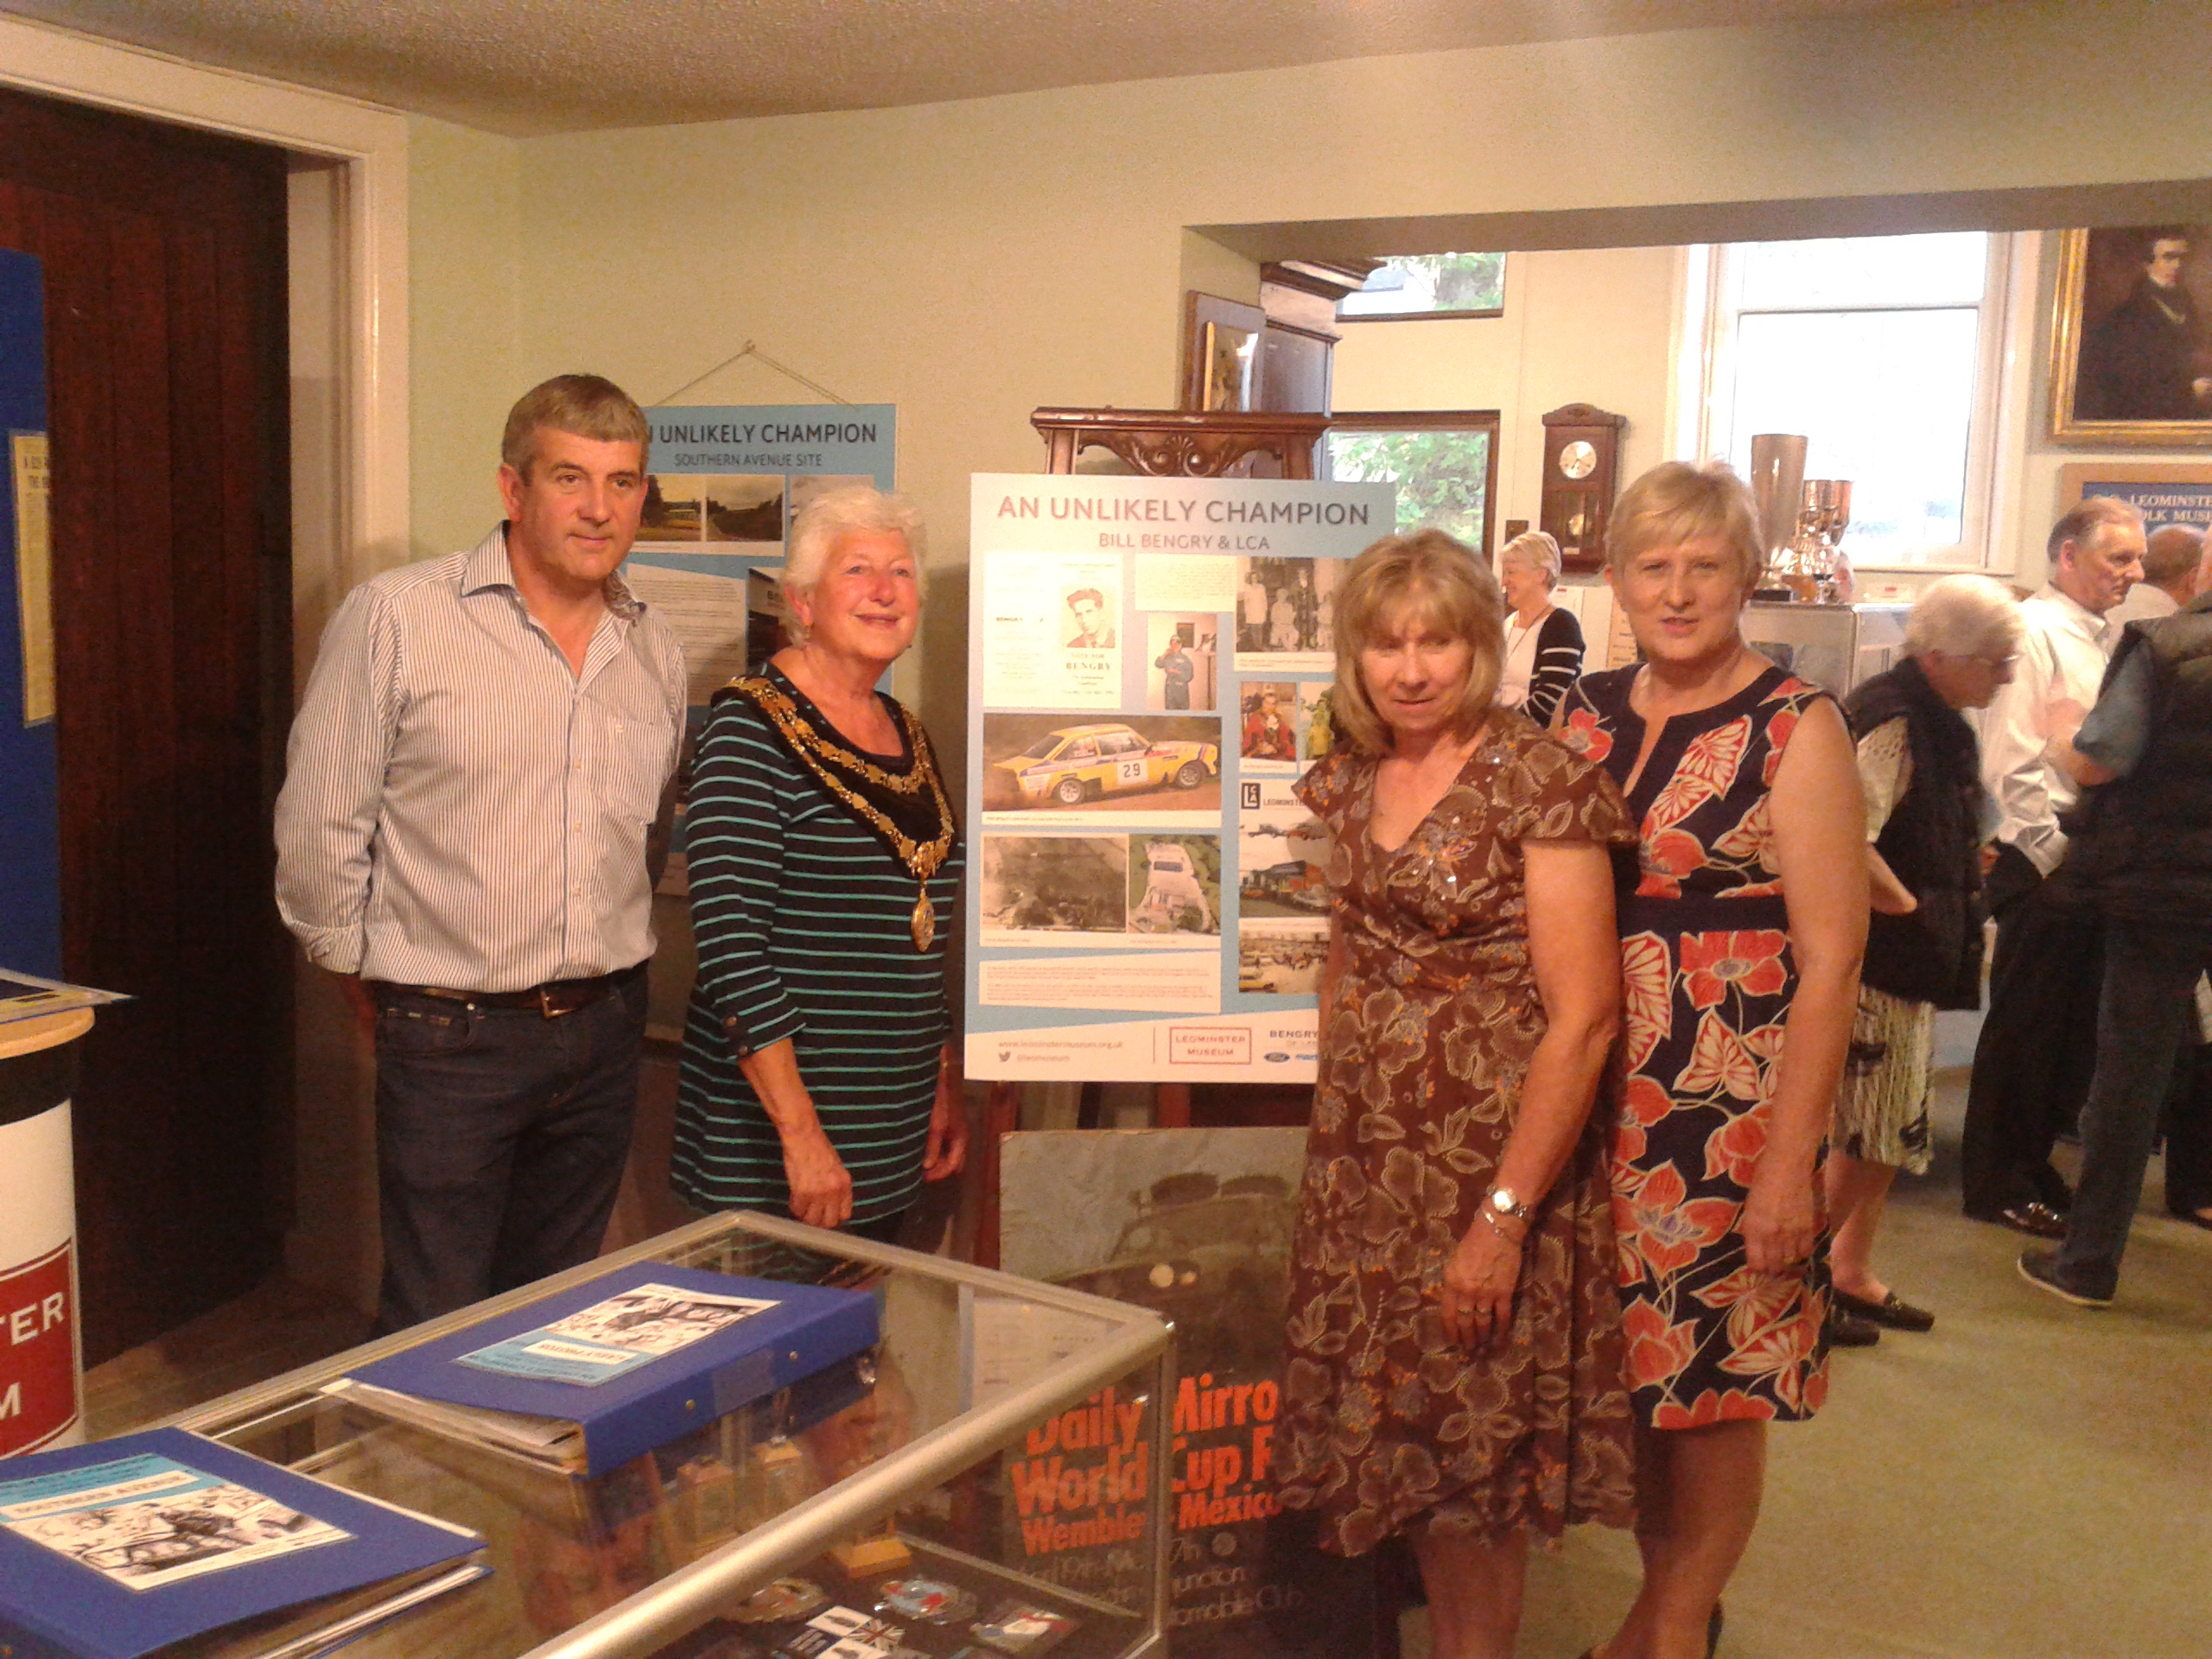 Members of the Bengry family with the Mayor of Leominster